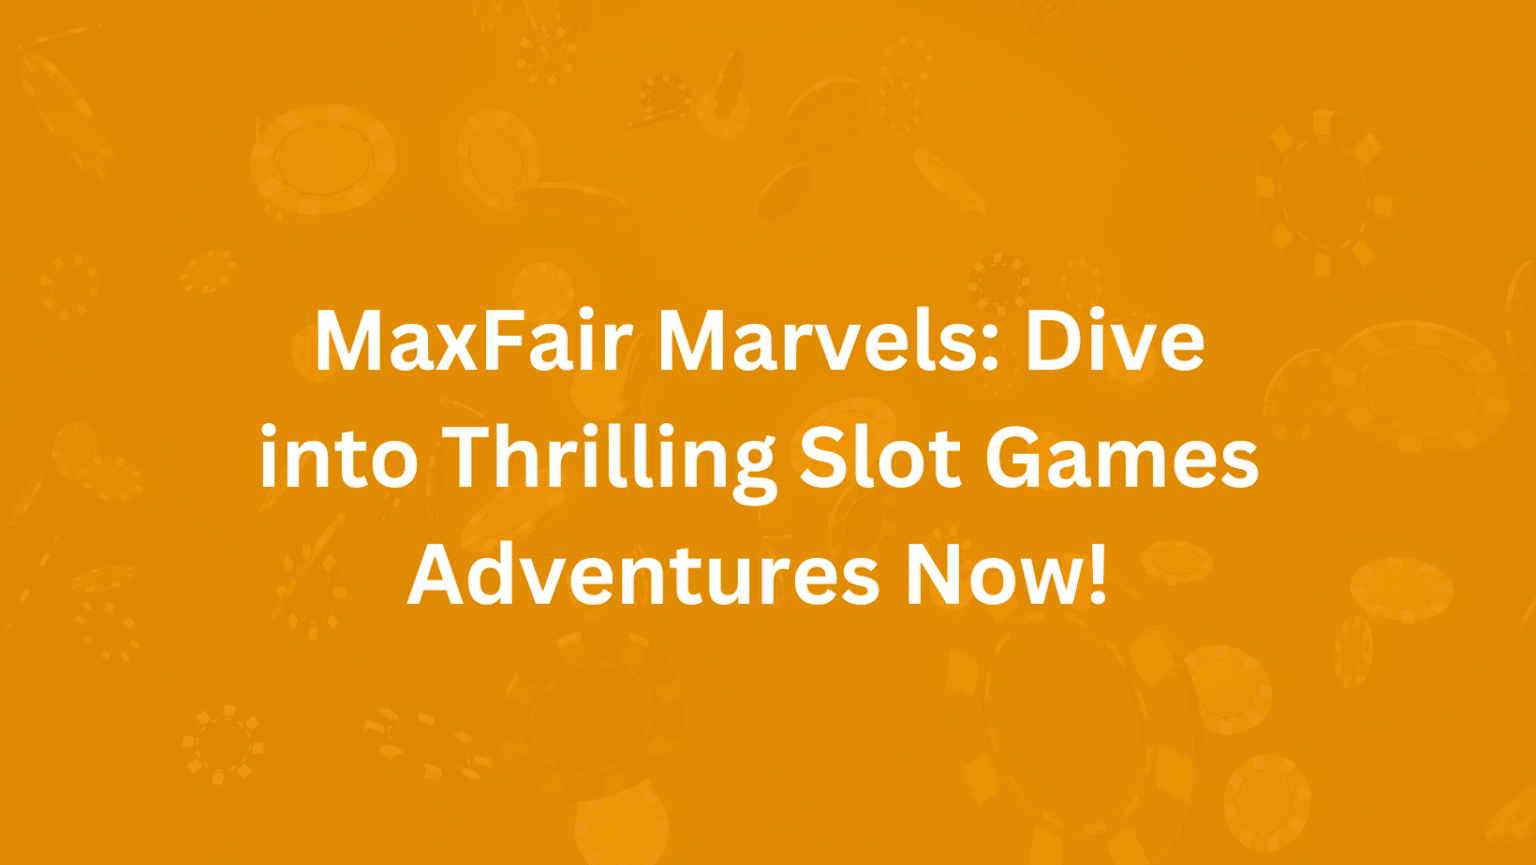 MaxFair Marvels Dive into Thrilling Slot Games Adventures Now